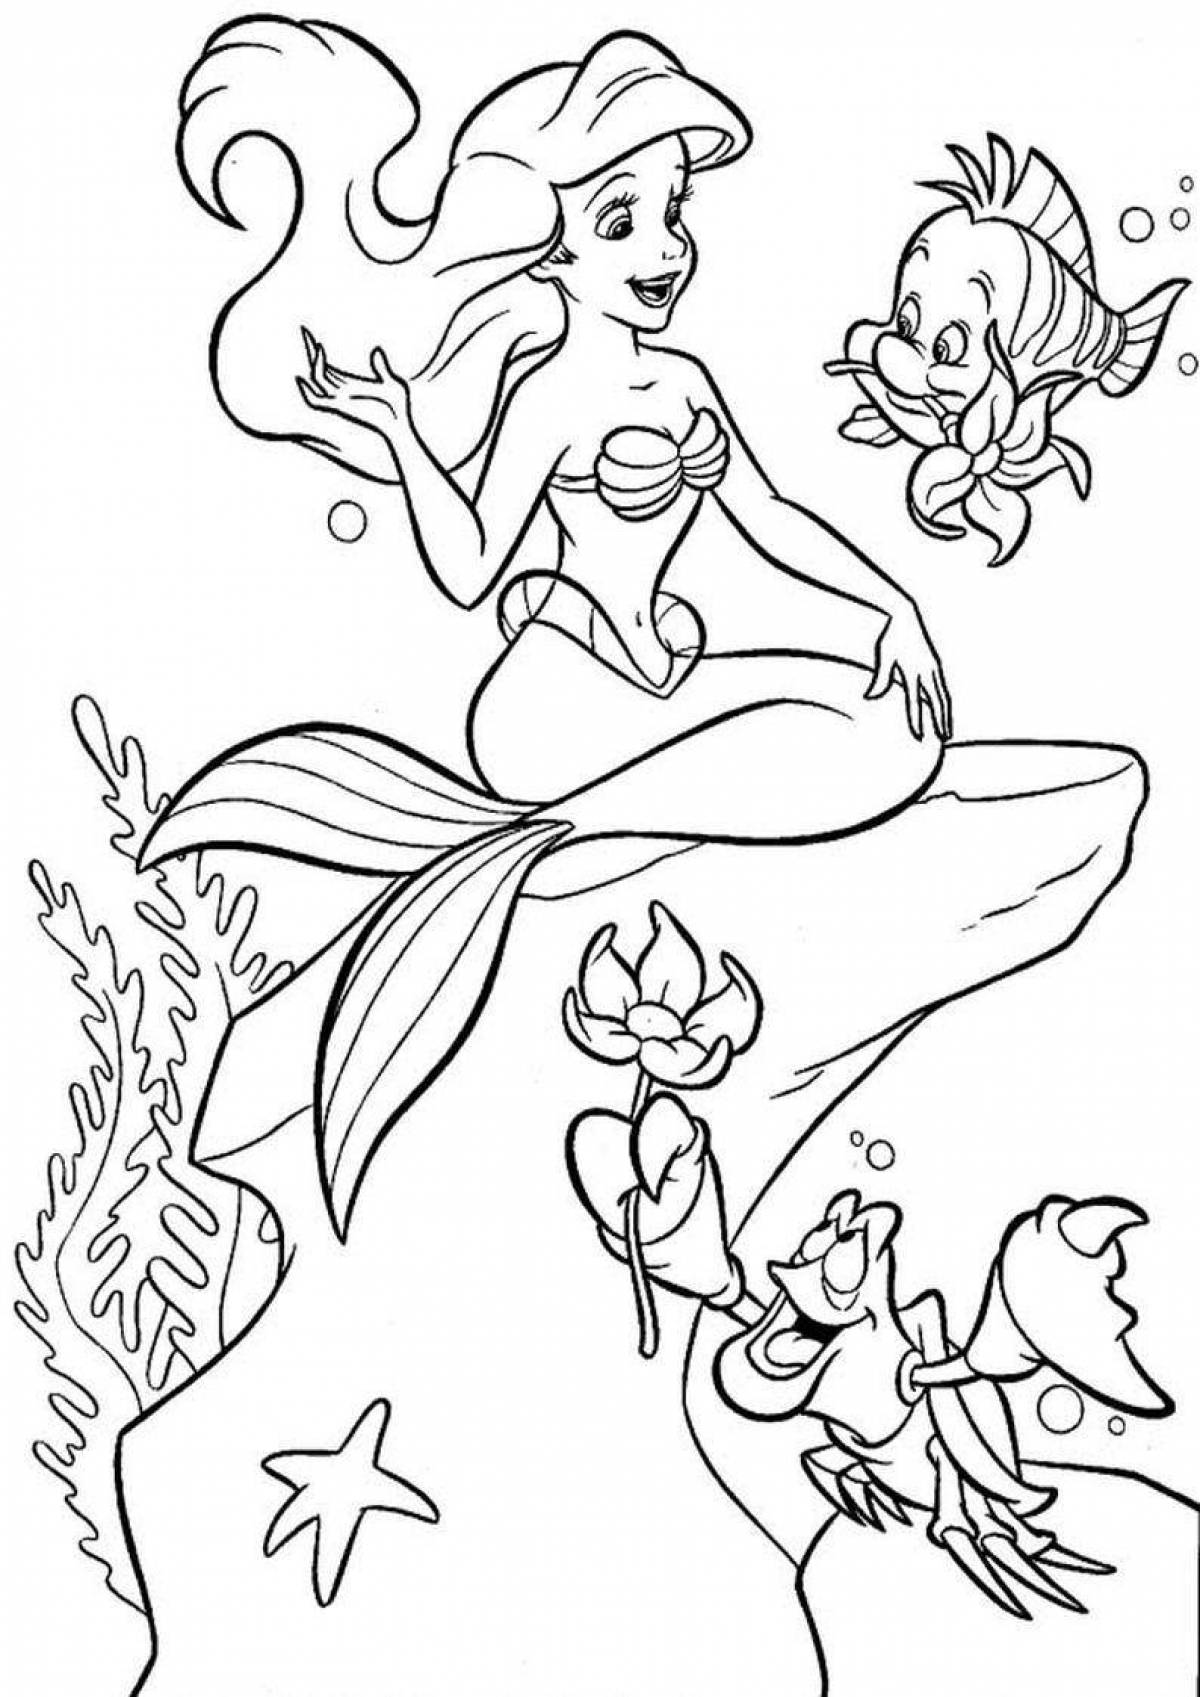 Awesome disney little mermaid coloring book